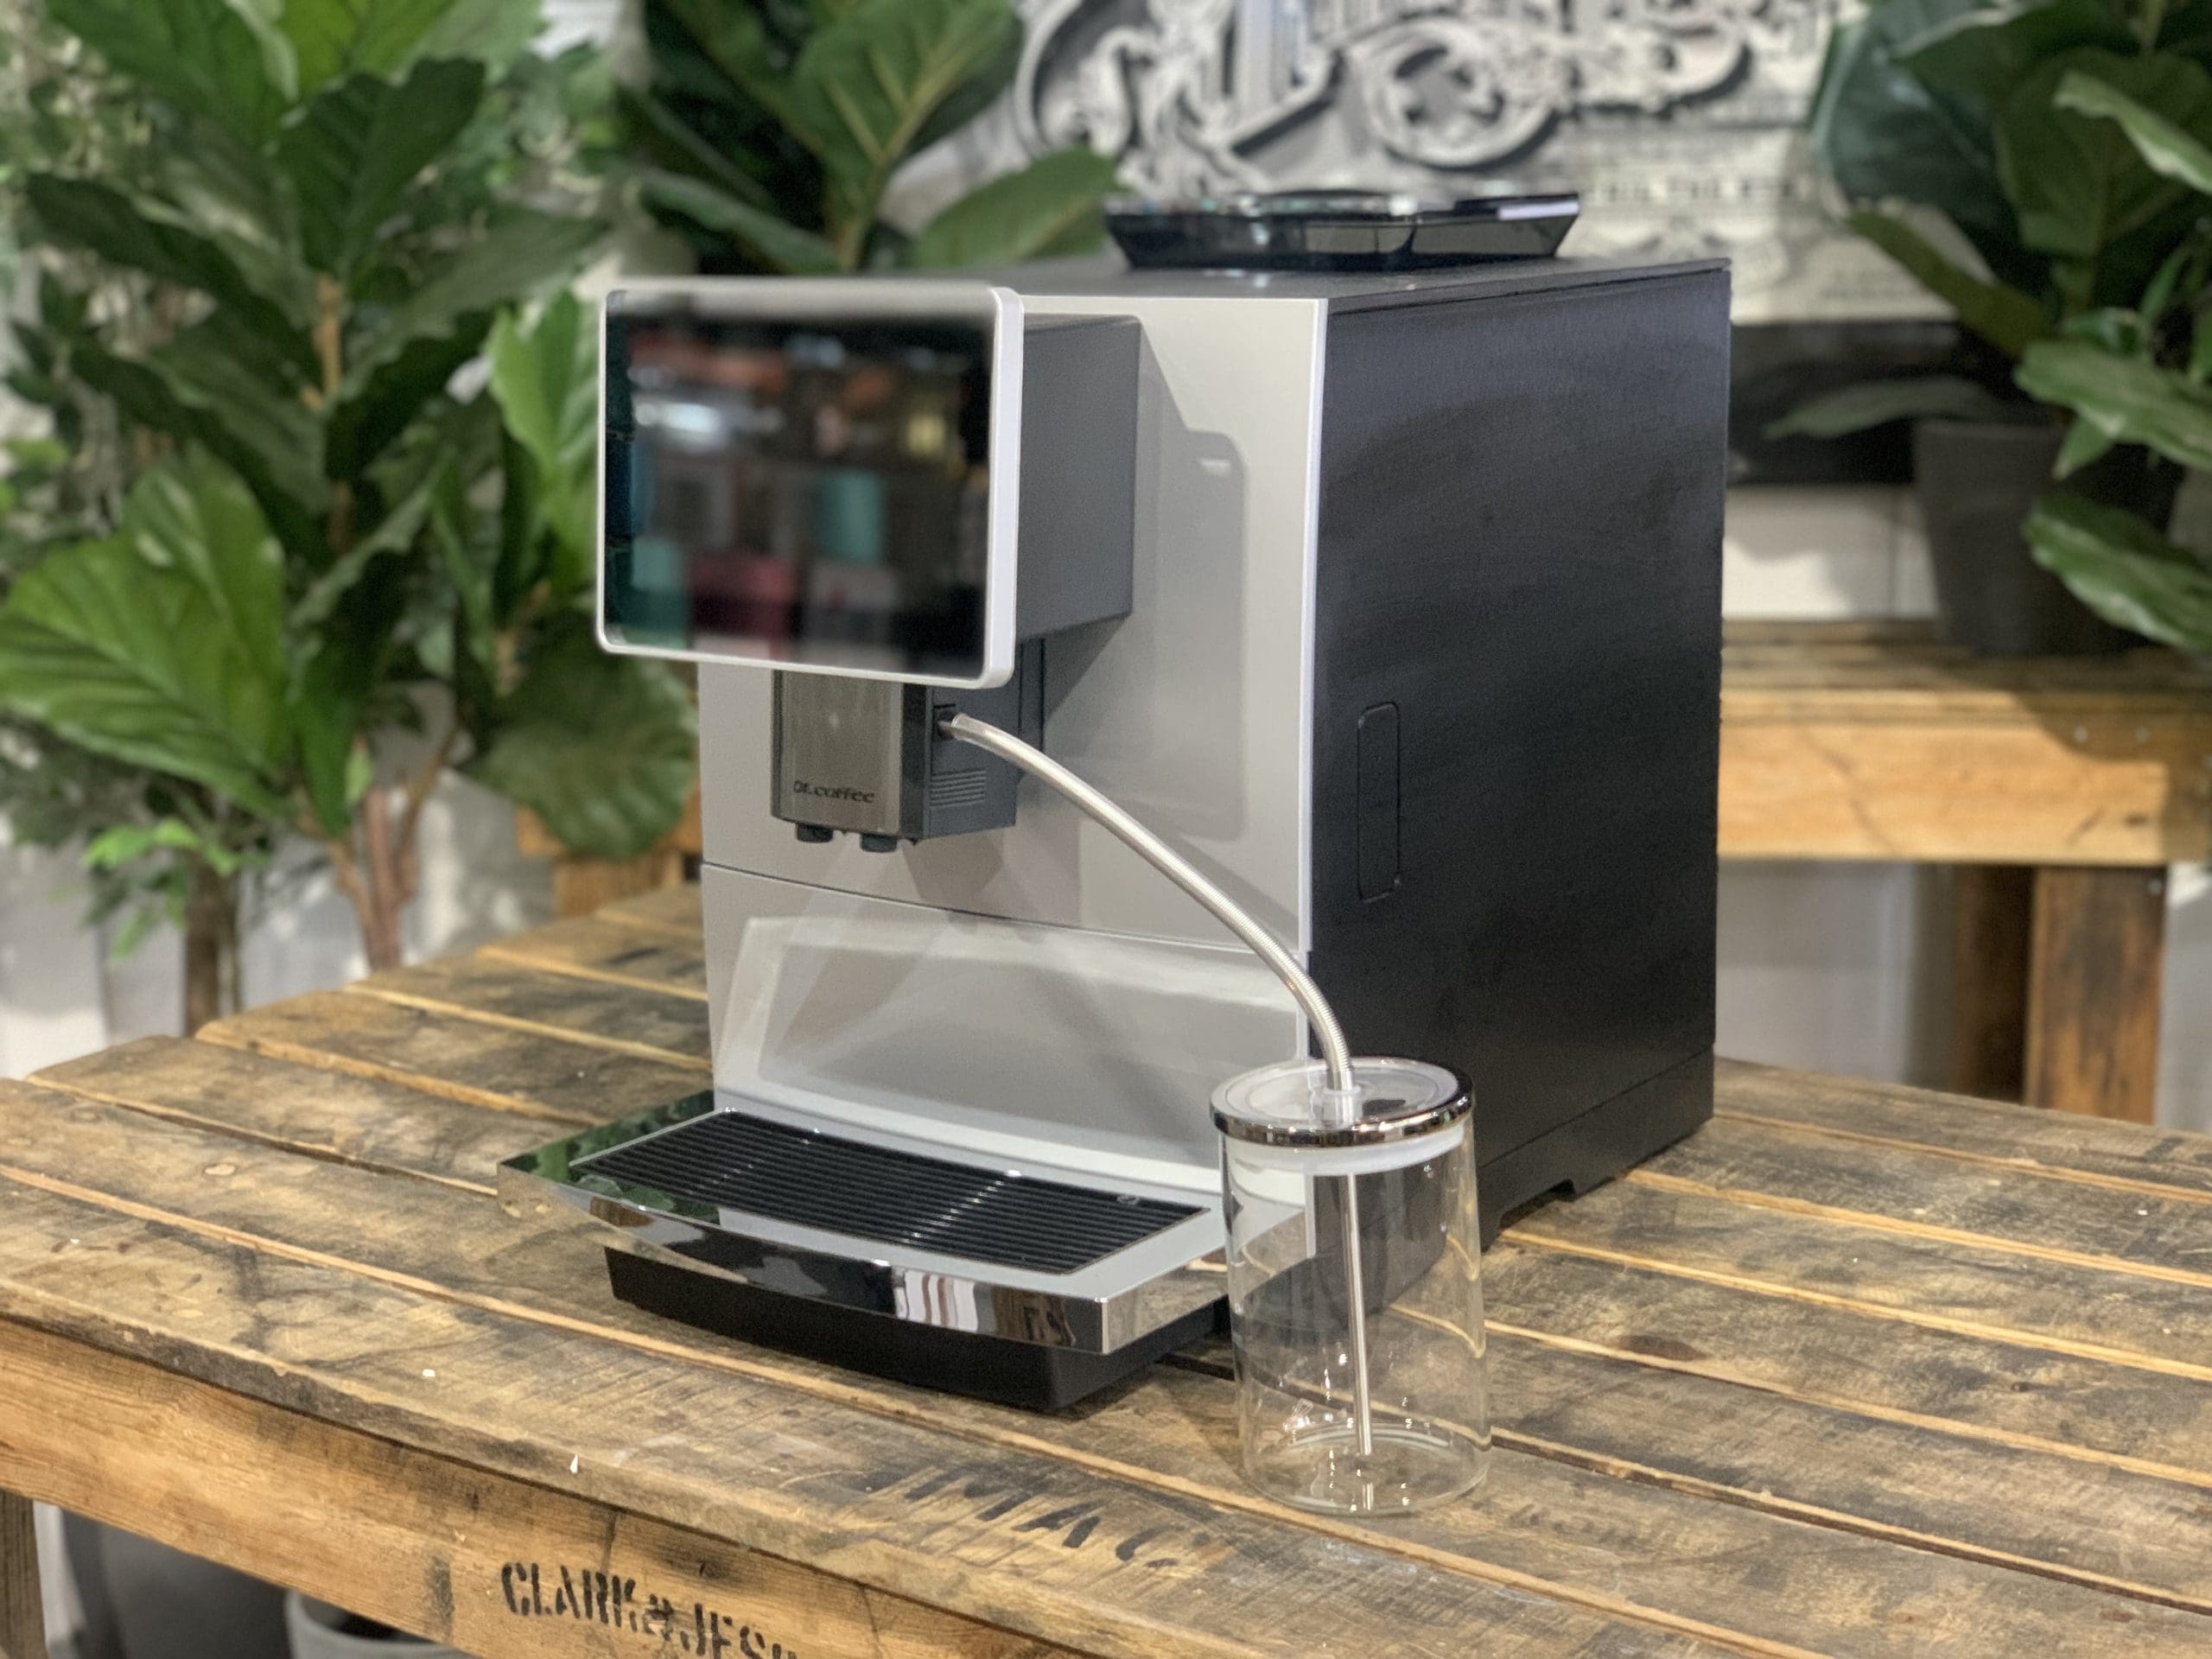 https://coffeemachinewarehouse.com.au/wp-content/uploads/2022/02/Dr-Coffee-H10-Fully-Automatic-Brand-New-Espresso-Coffee-Grinder-Coffee-Machine-Warehouse-1858-Princes-Highway-Clayton-VIC-3168IMG_5833-scaled-1.jpg